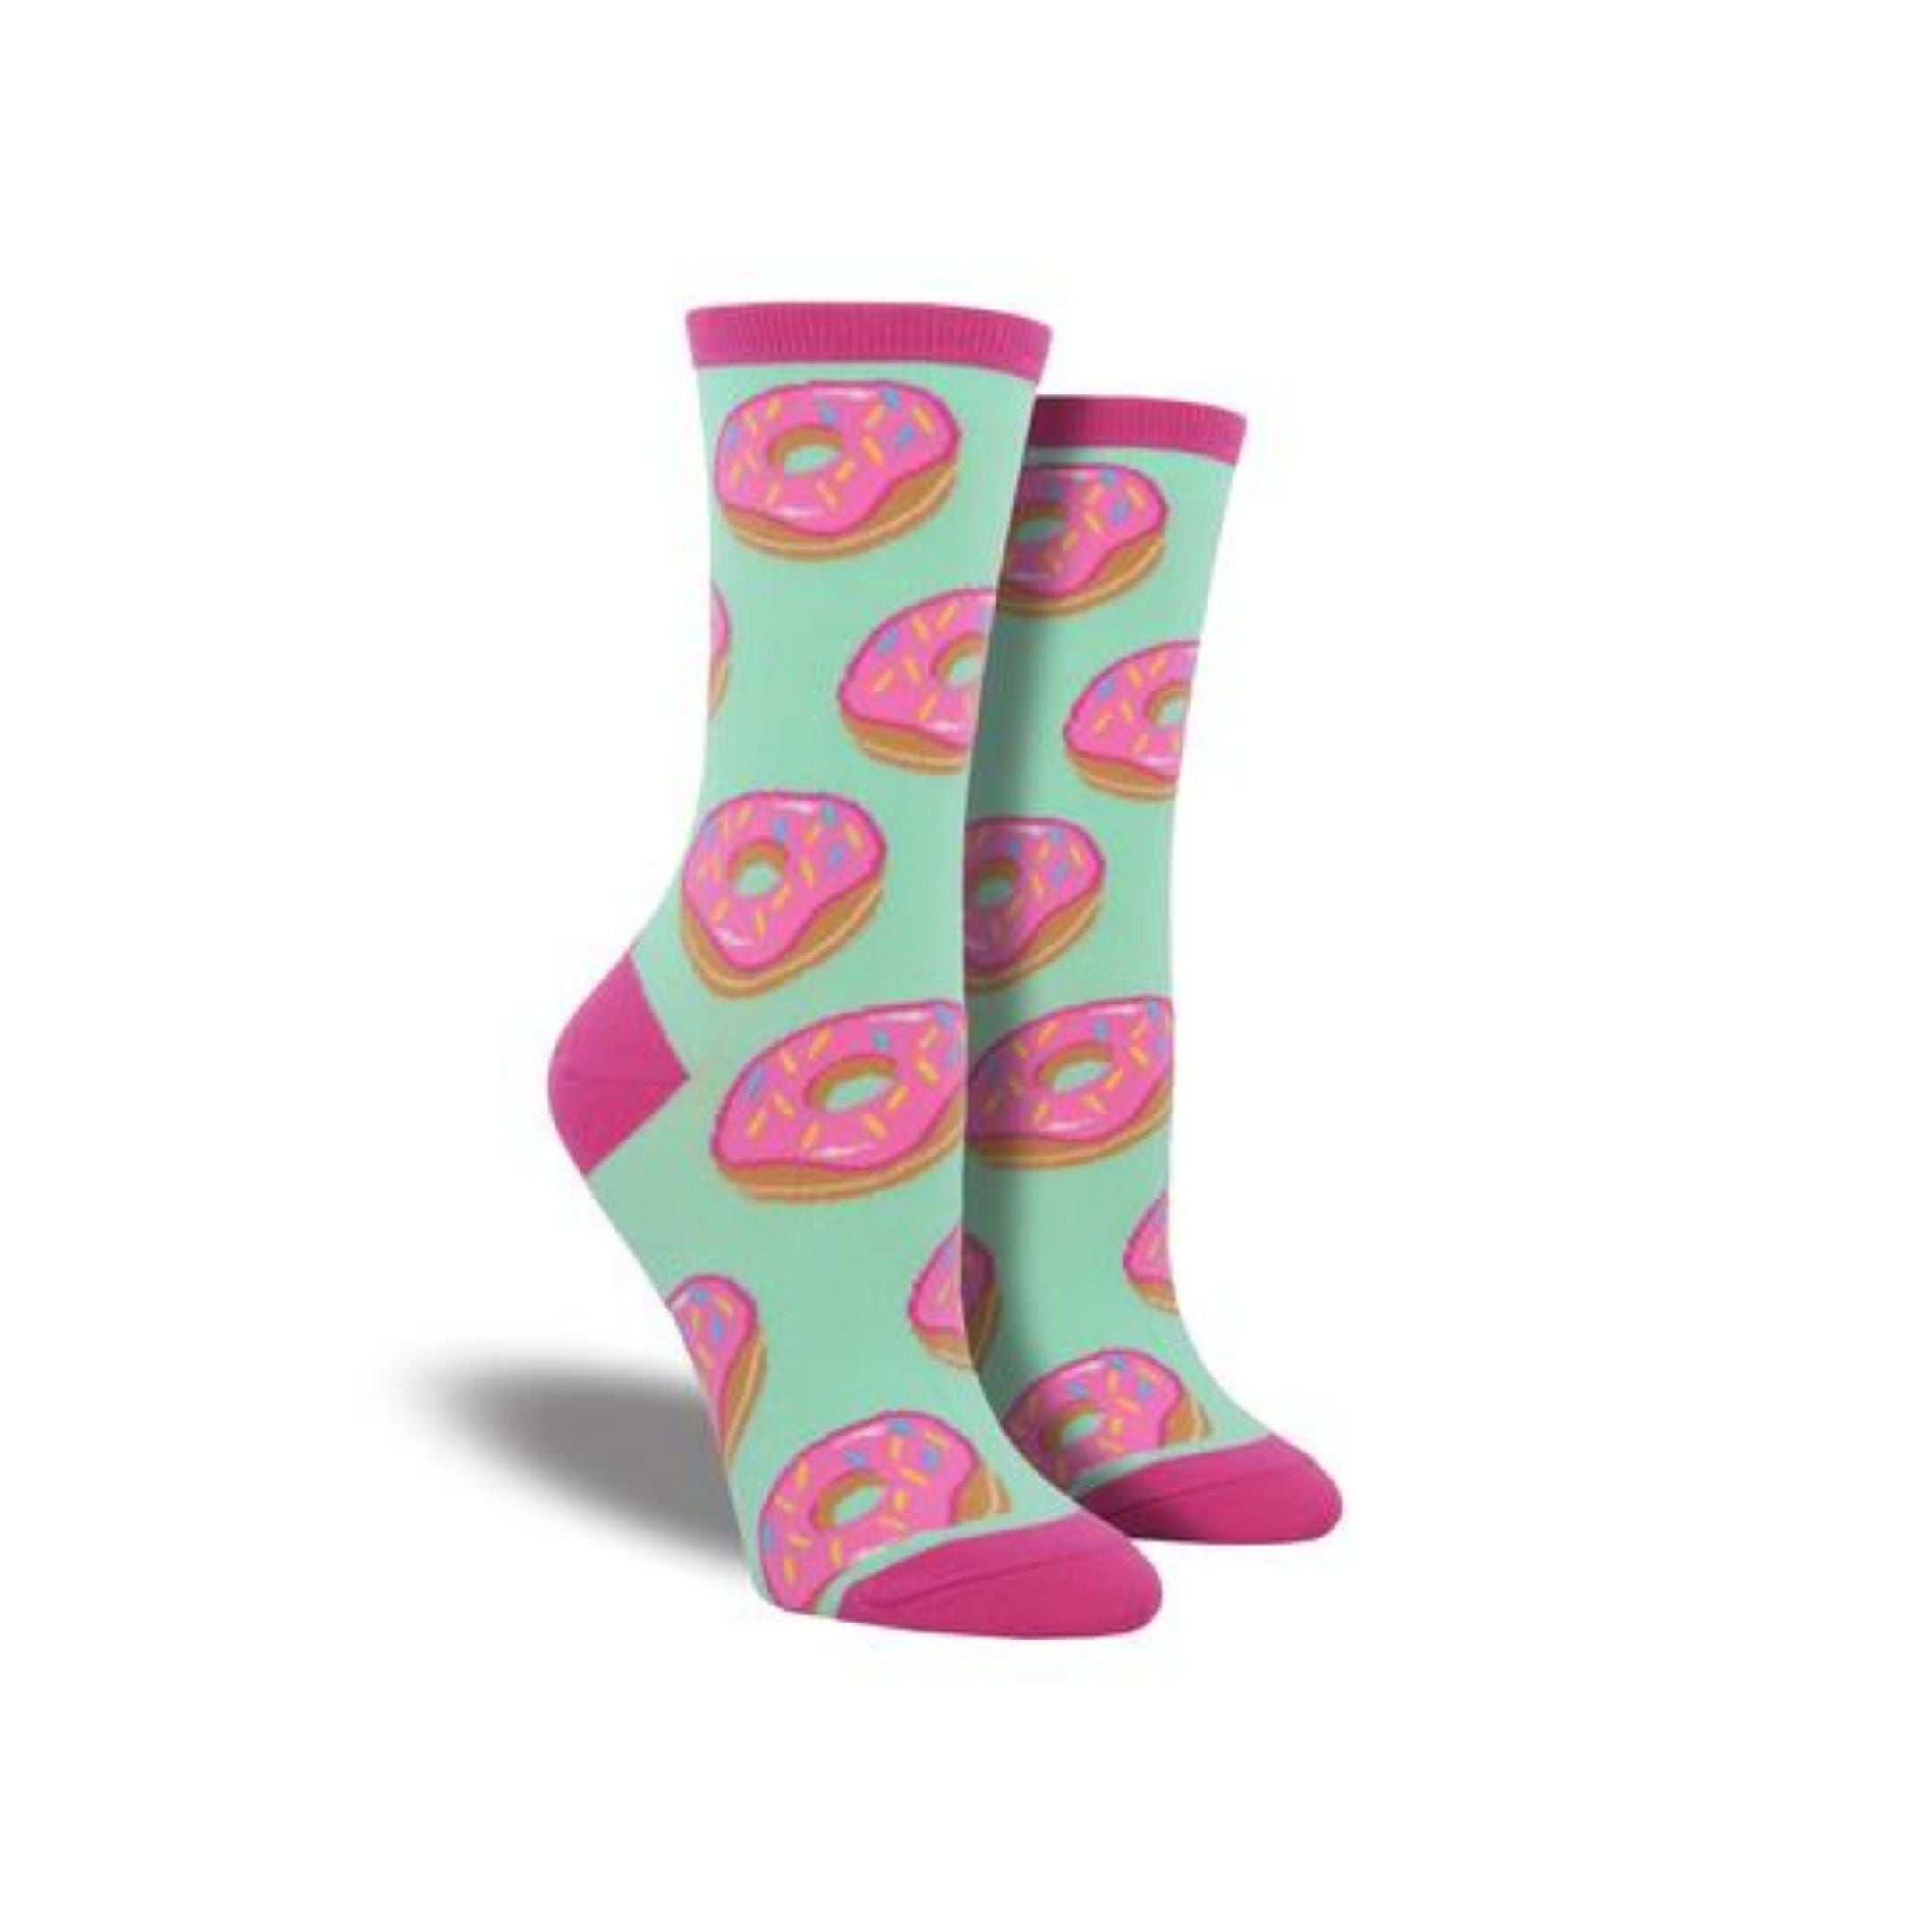 Teal socks with pink accents featuring pink sprinkle dounuts